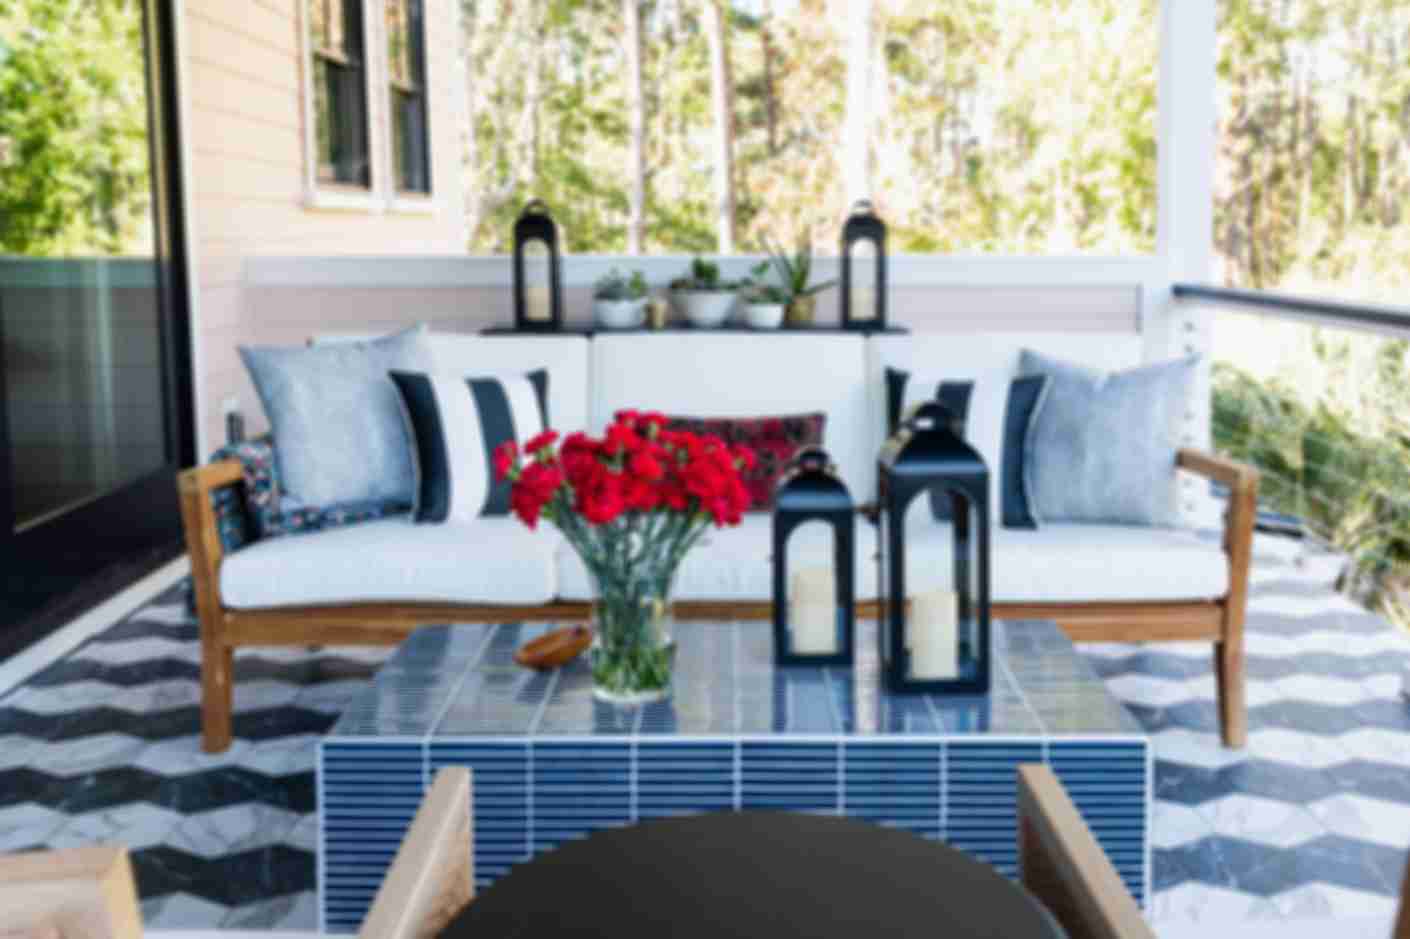 White outdoor sofa on a back porch with a custom tiled floor pattern made of black and white marble hex tiles.